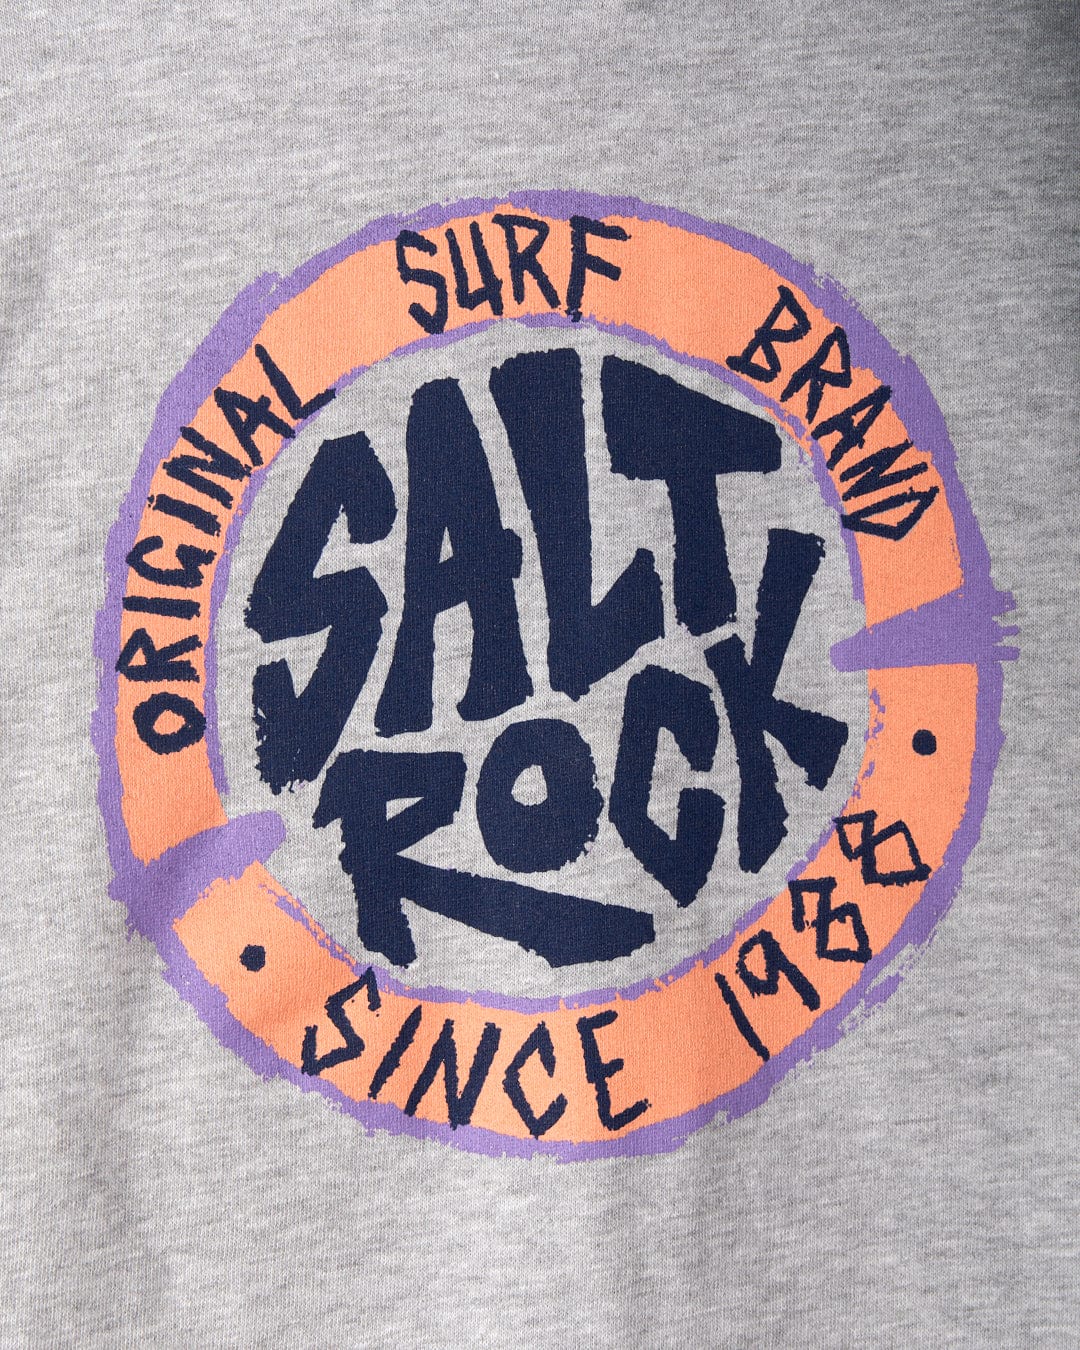 Grey kids zip hoodie featuring a circular logo with "Saltrock" in blue letters. Surrounding text reads "Original Surf Brand" and "Since 1988" in black letters on a purple and pink border.